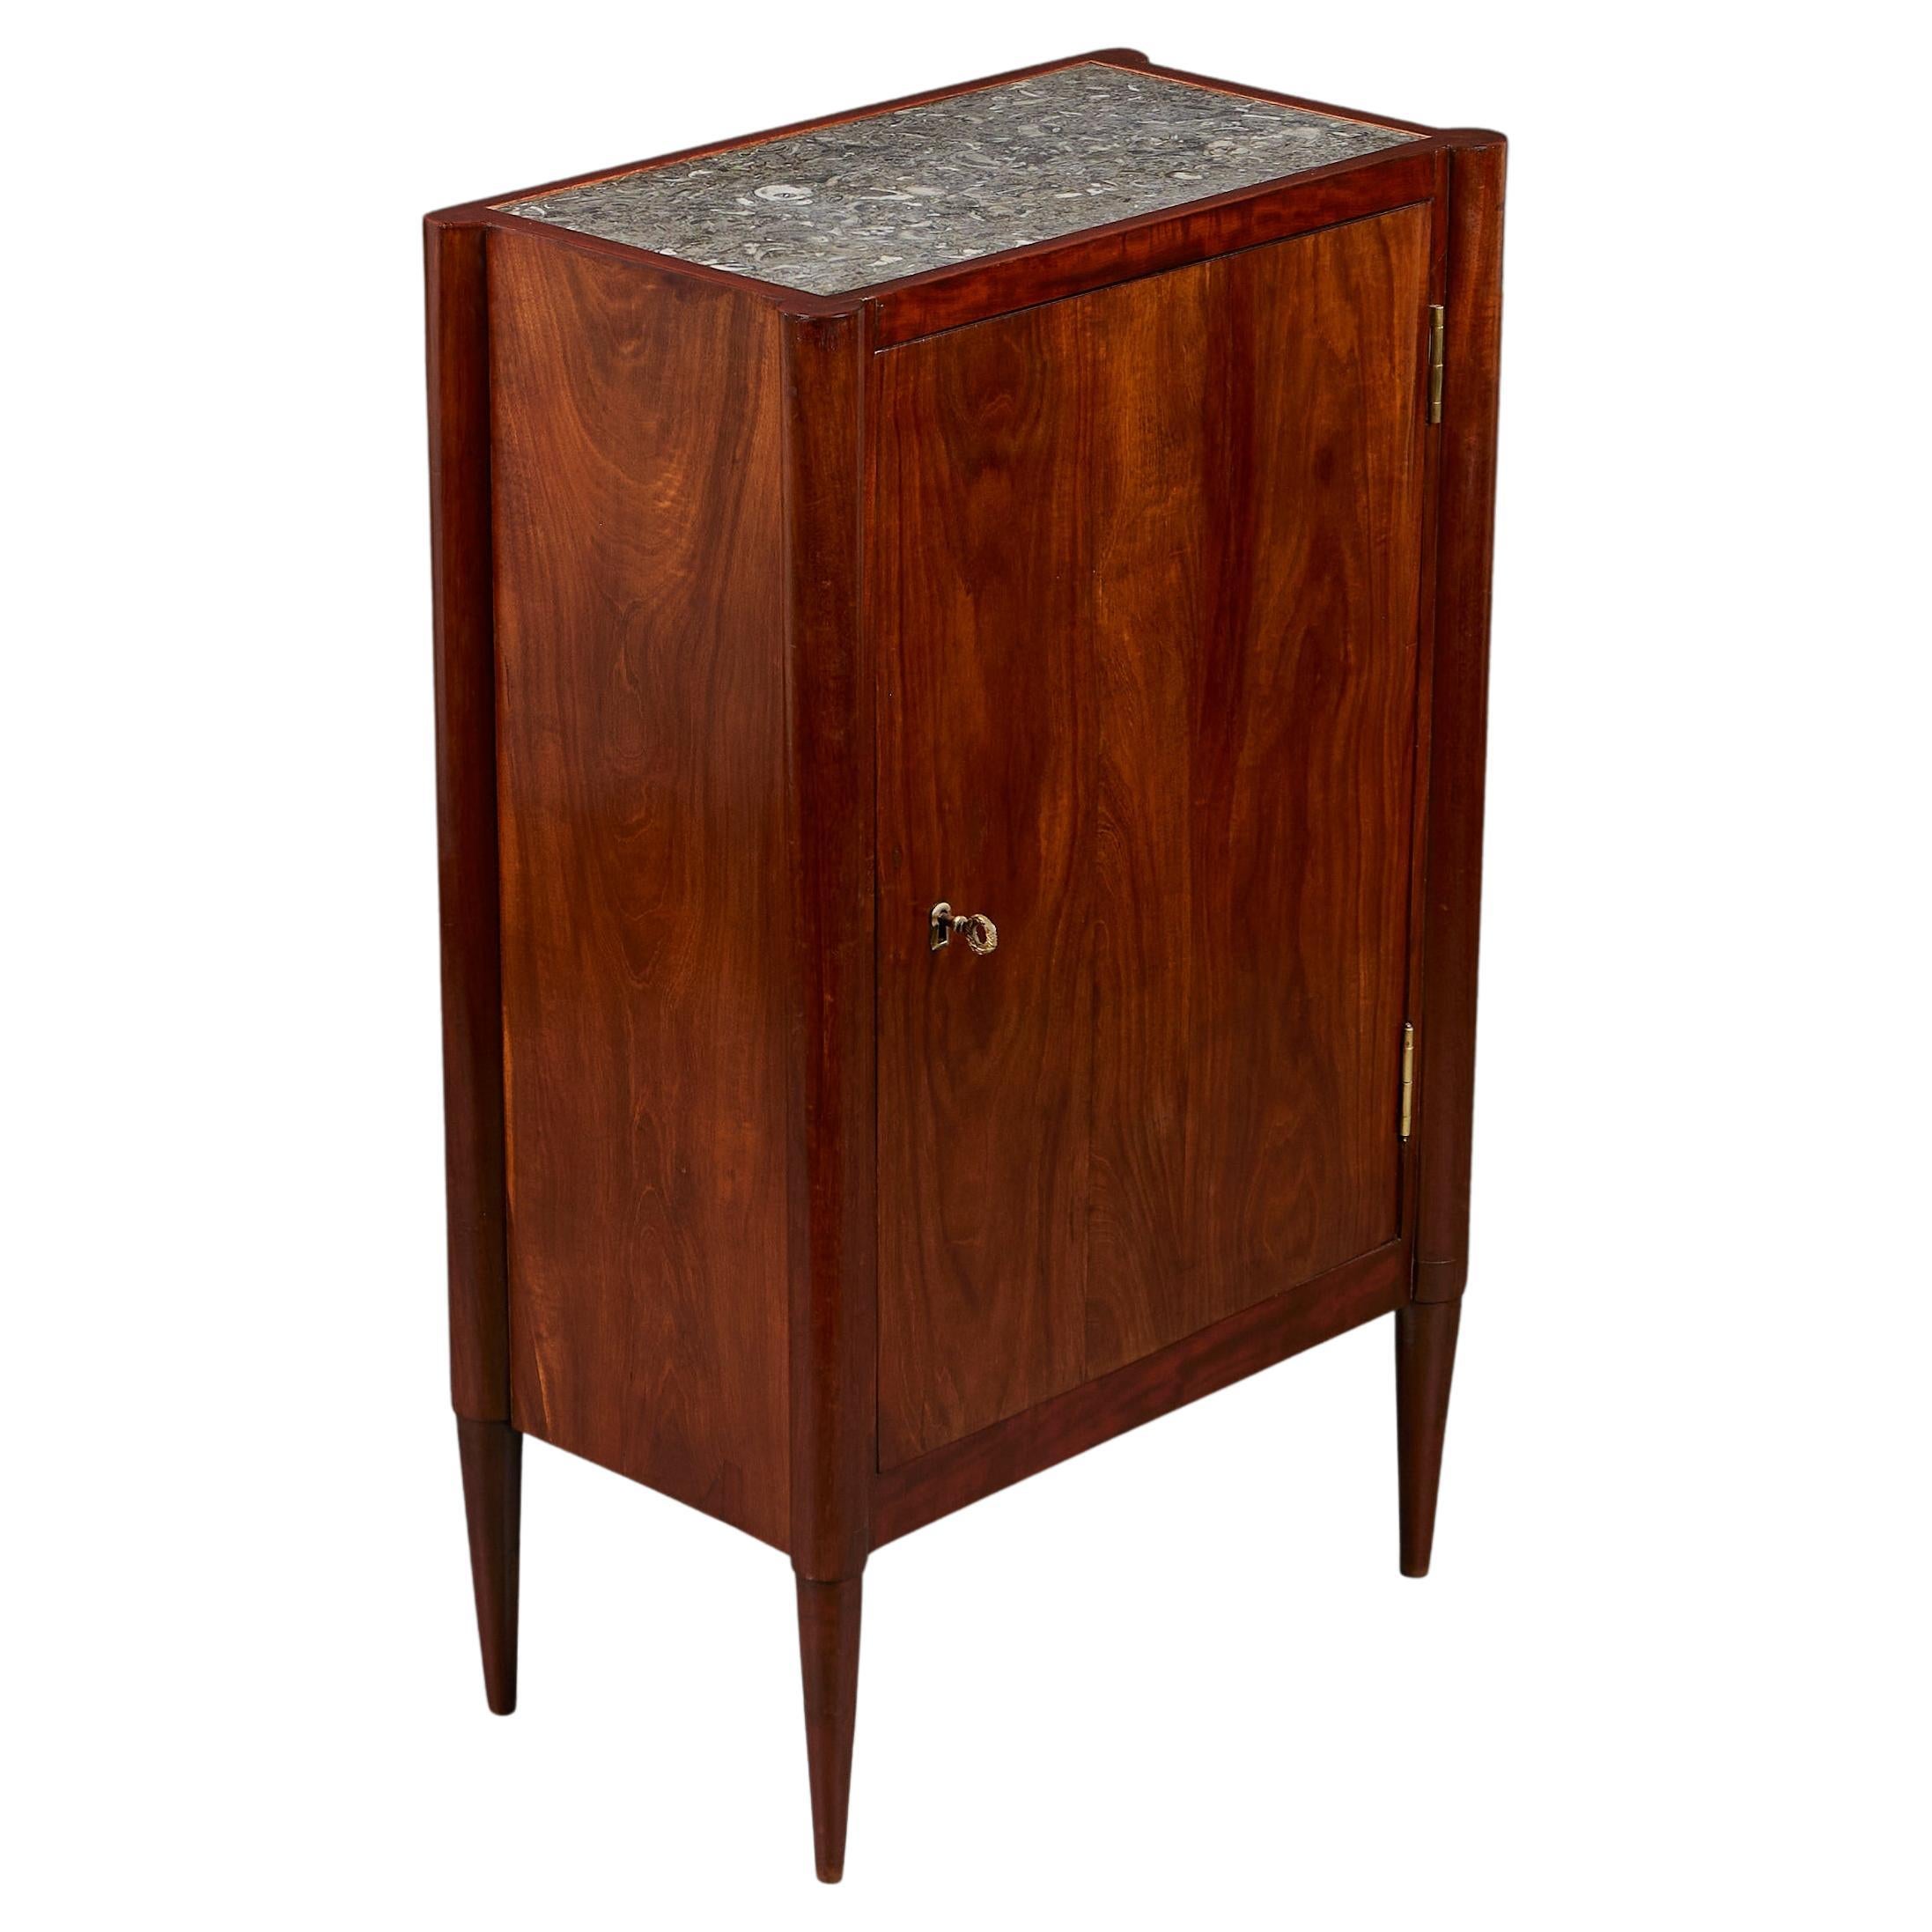 A French Art Deco Cocktail Cabinet